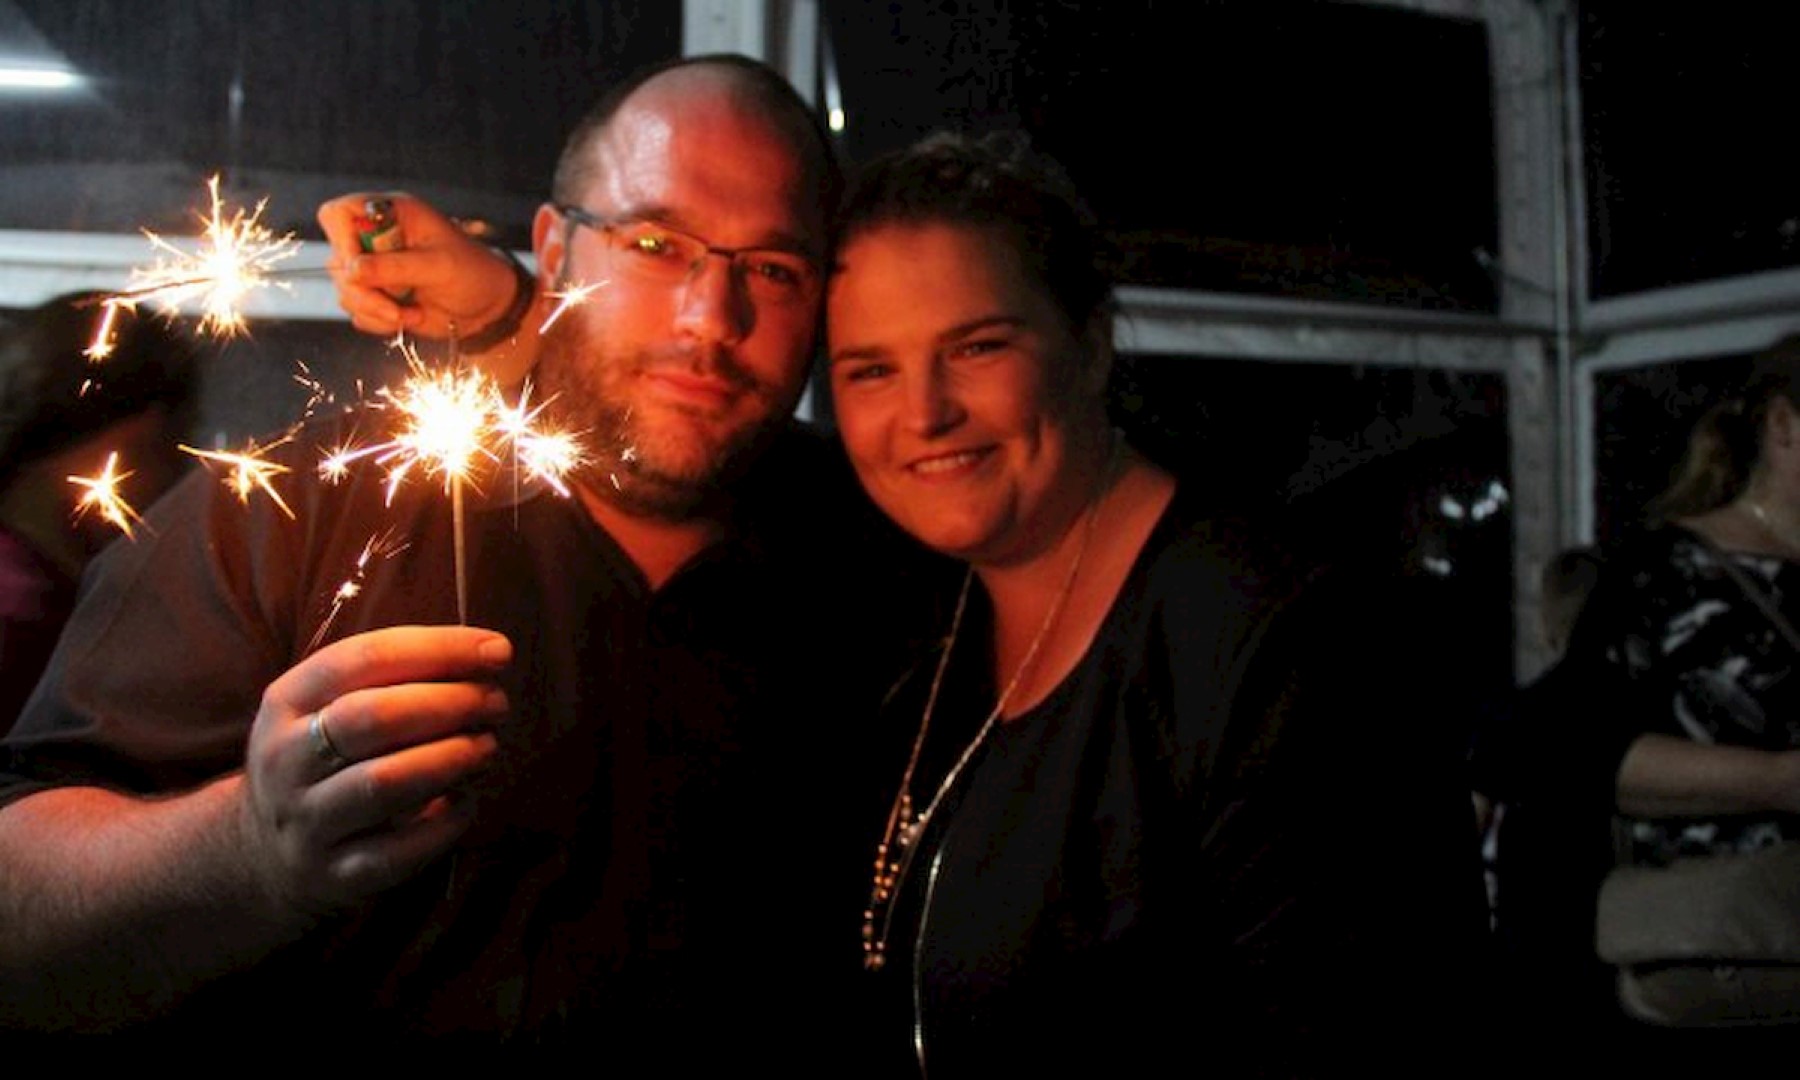 Man and Woman doing sparkler fireworks